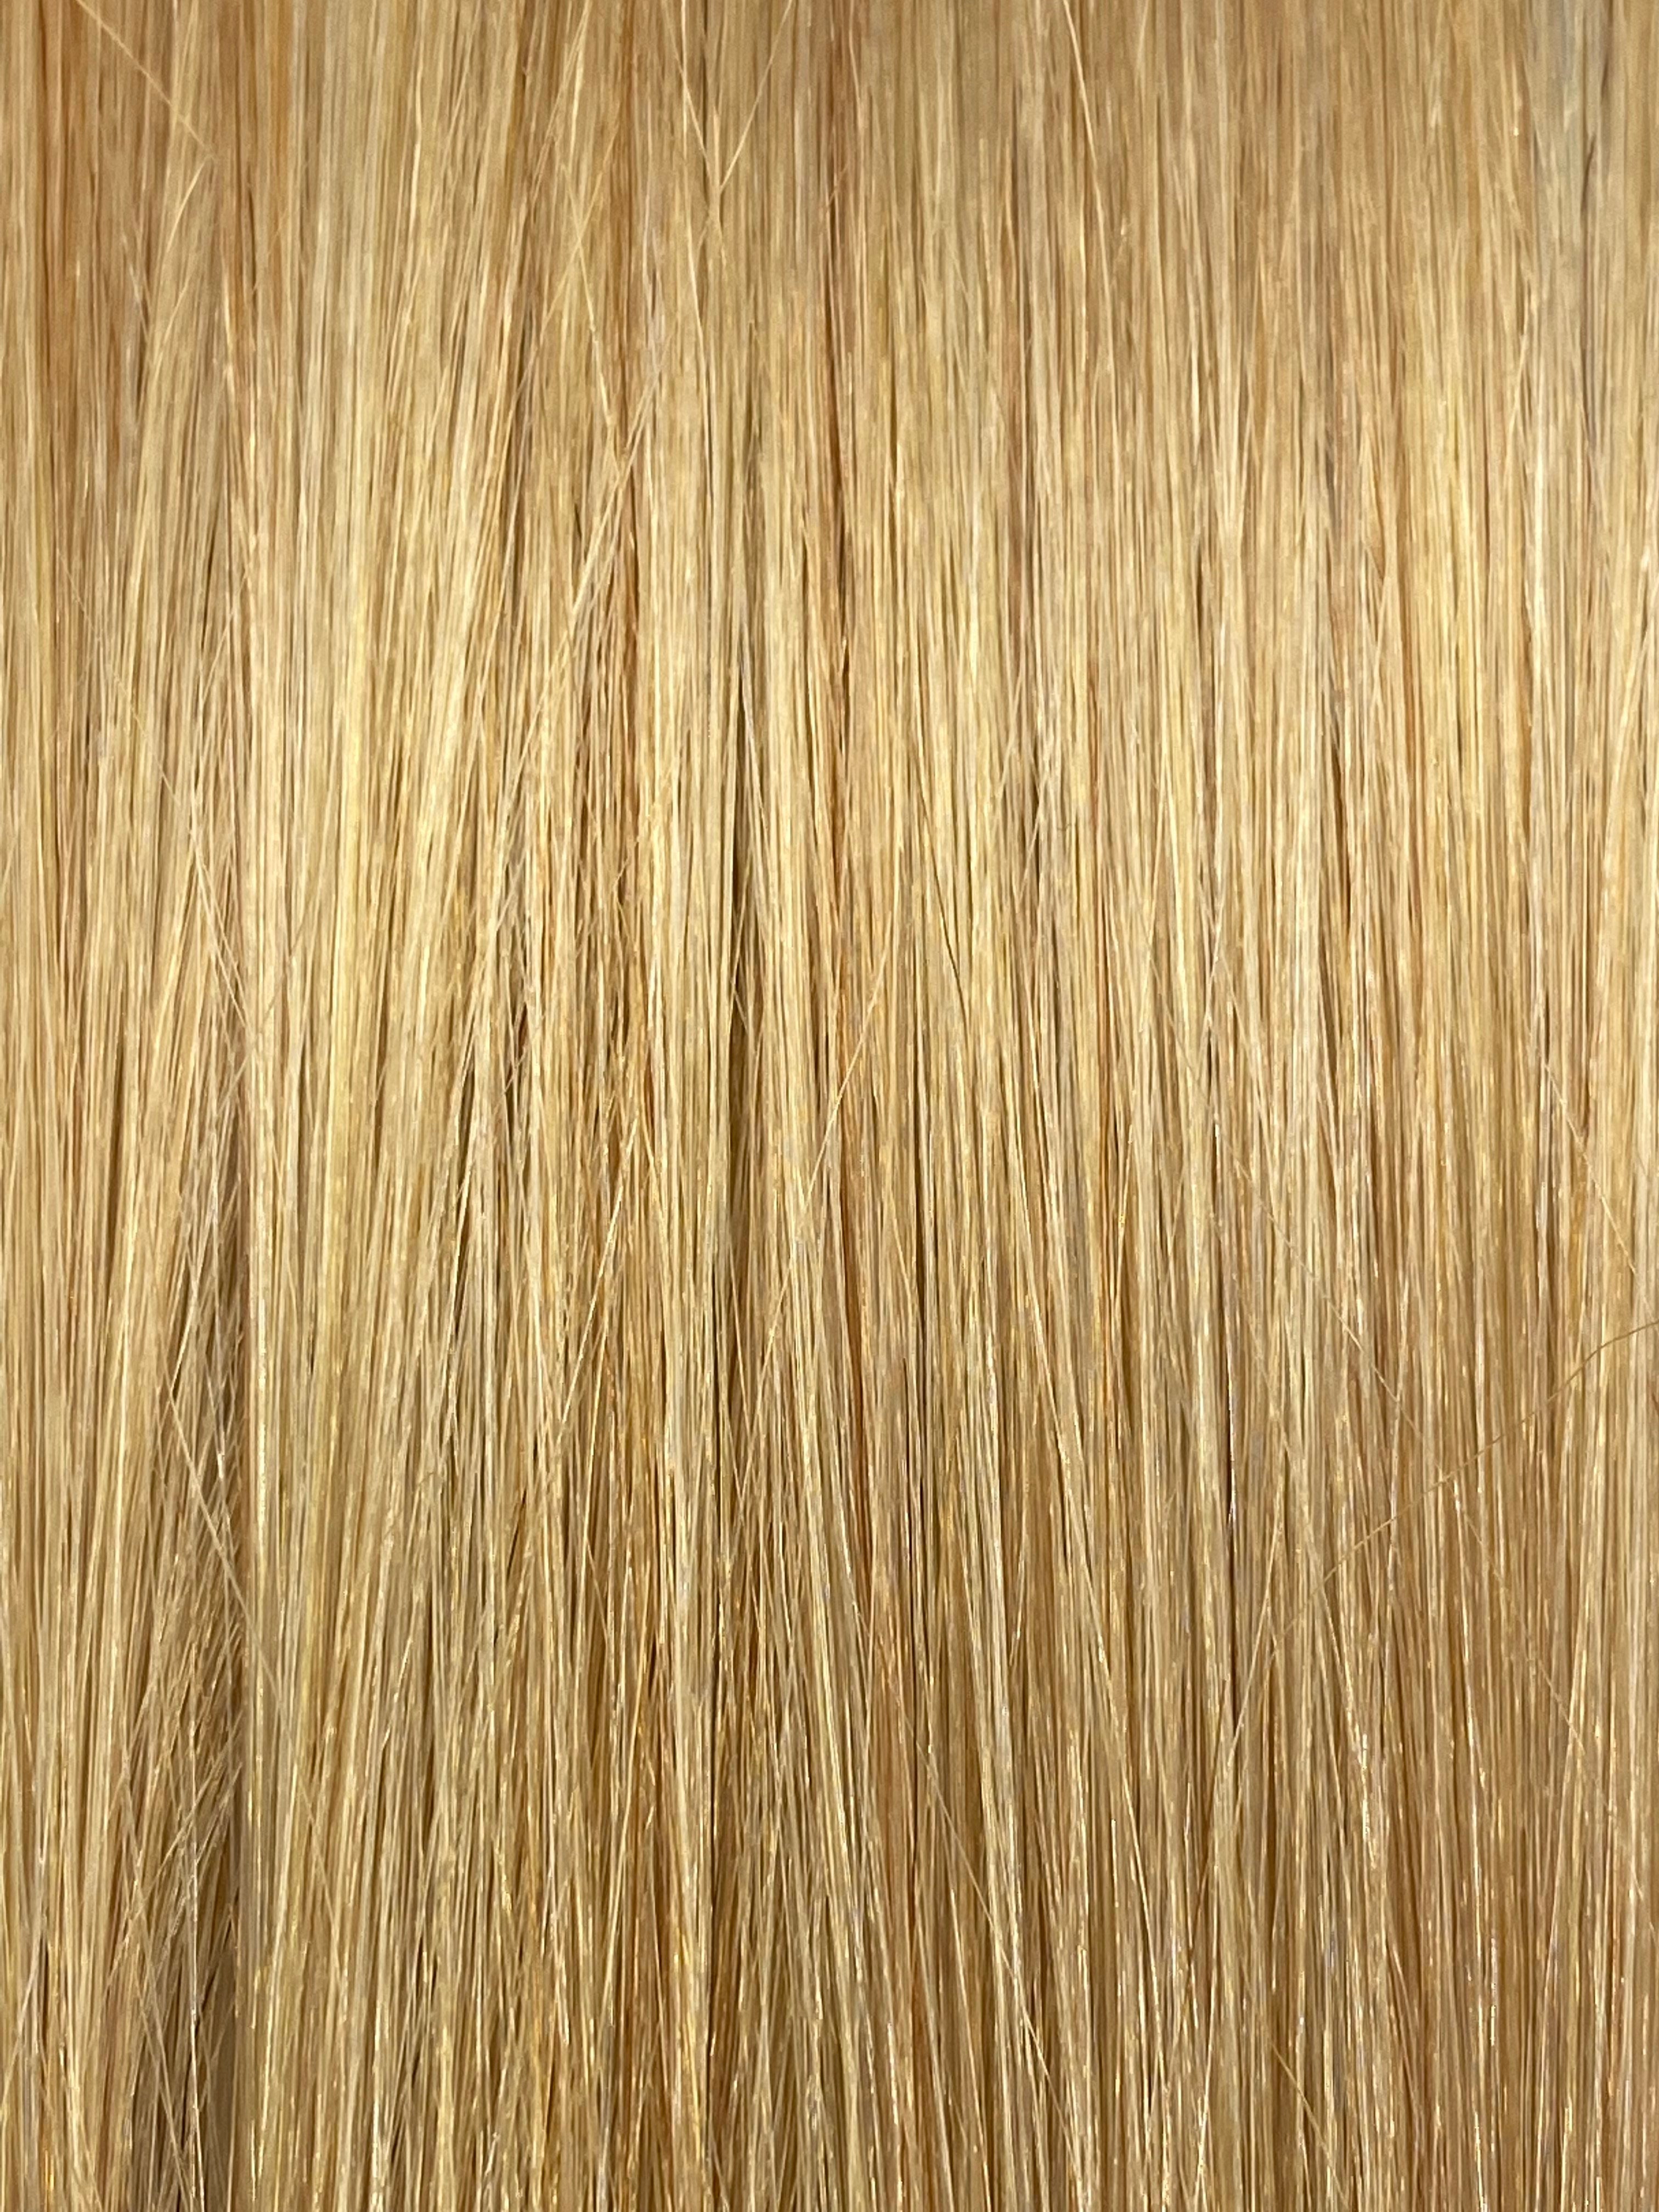 Tape #24 - 50cm/ 20 Inches - Ash Blonde - 20 Grams